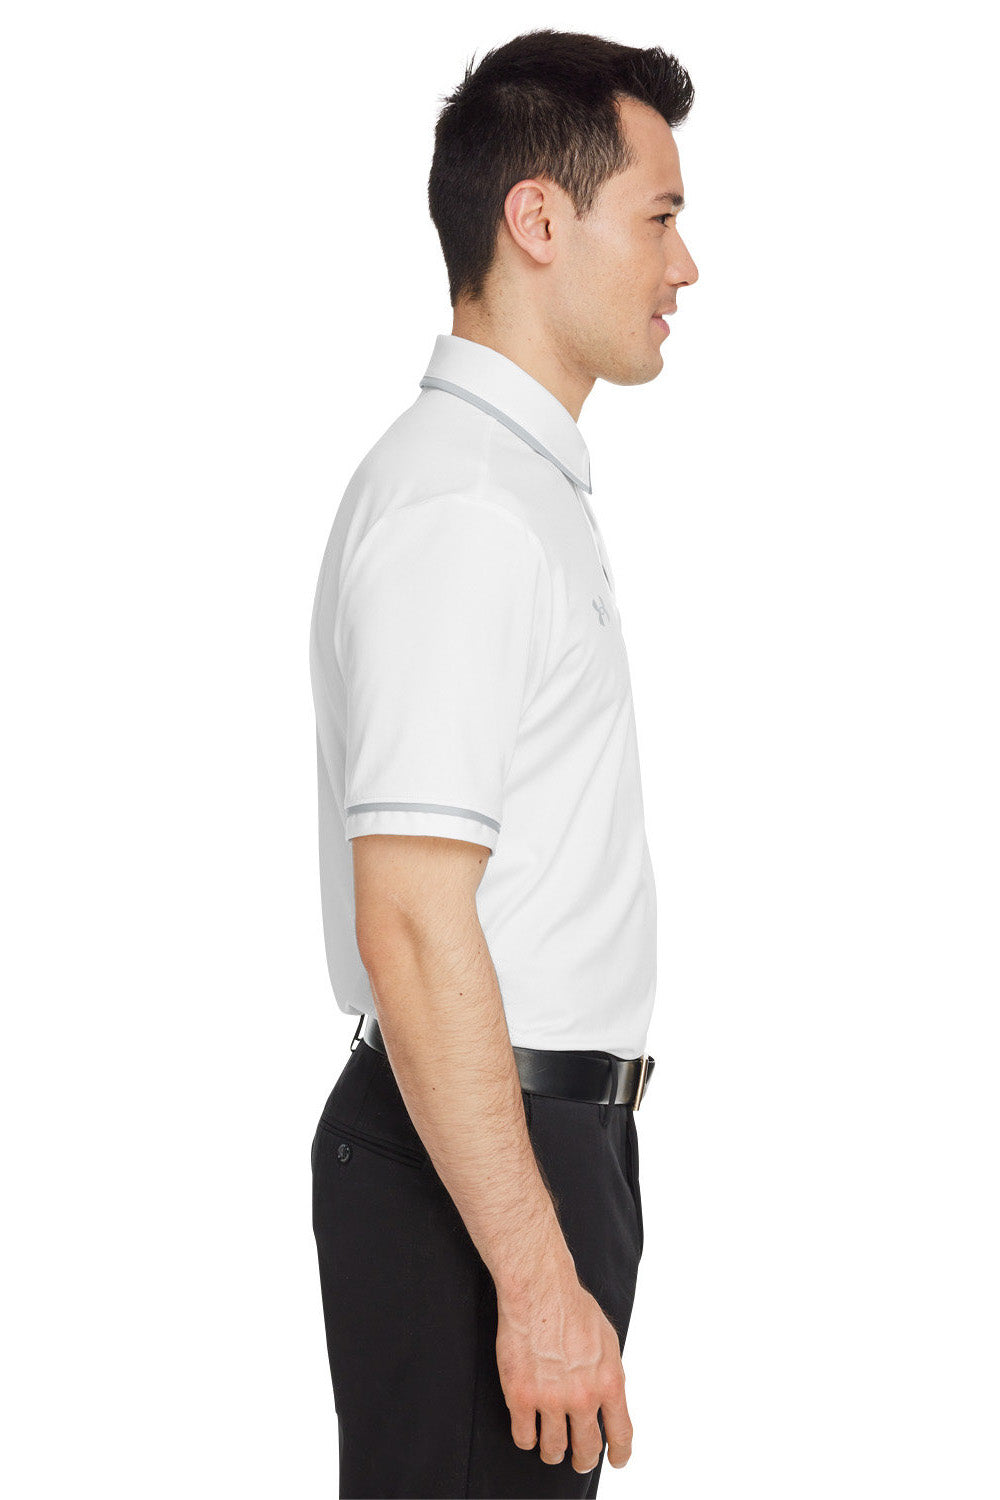 Under Armour 1376904 Mens Teams Performance Moisture Wicking Short Sleeve Polo Shirt White Model Side